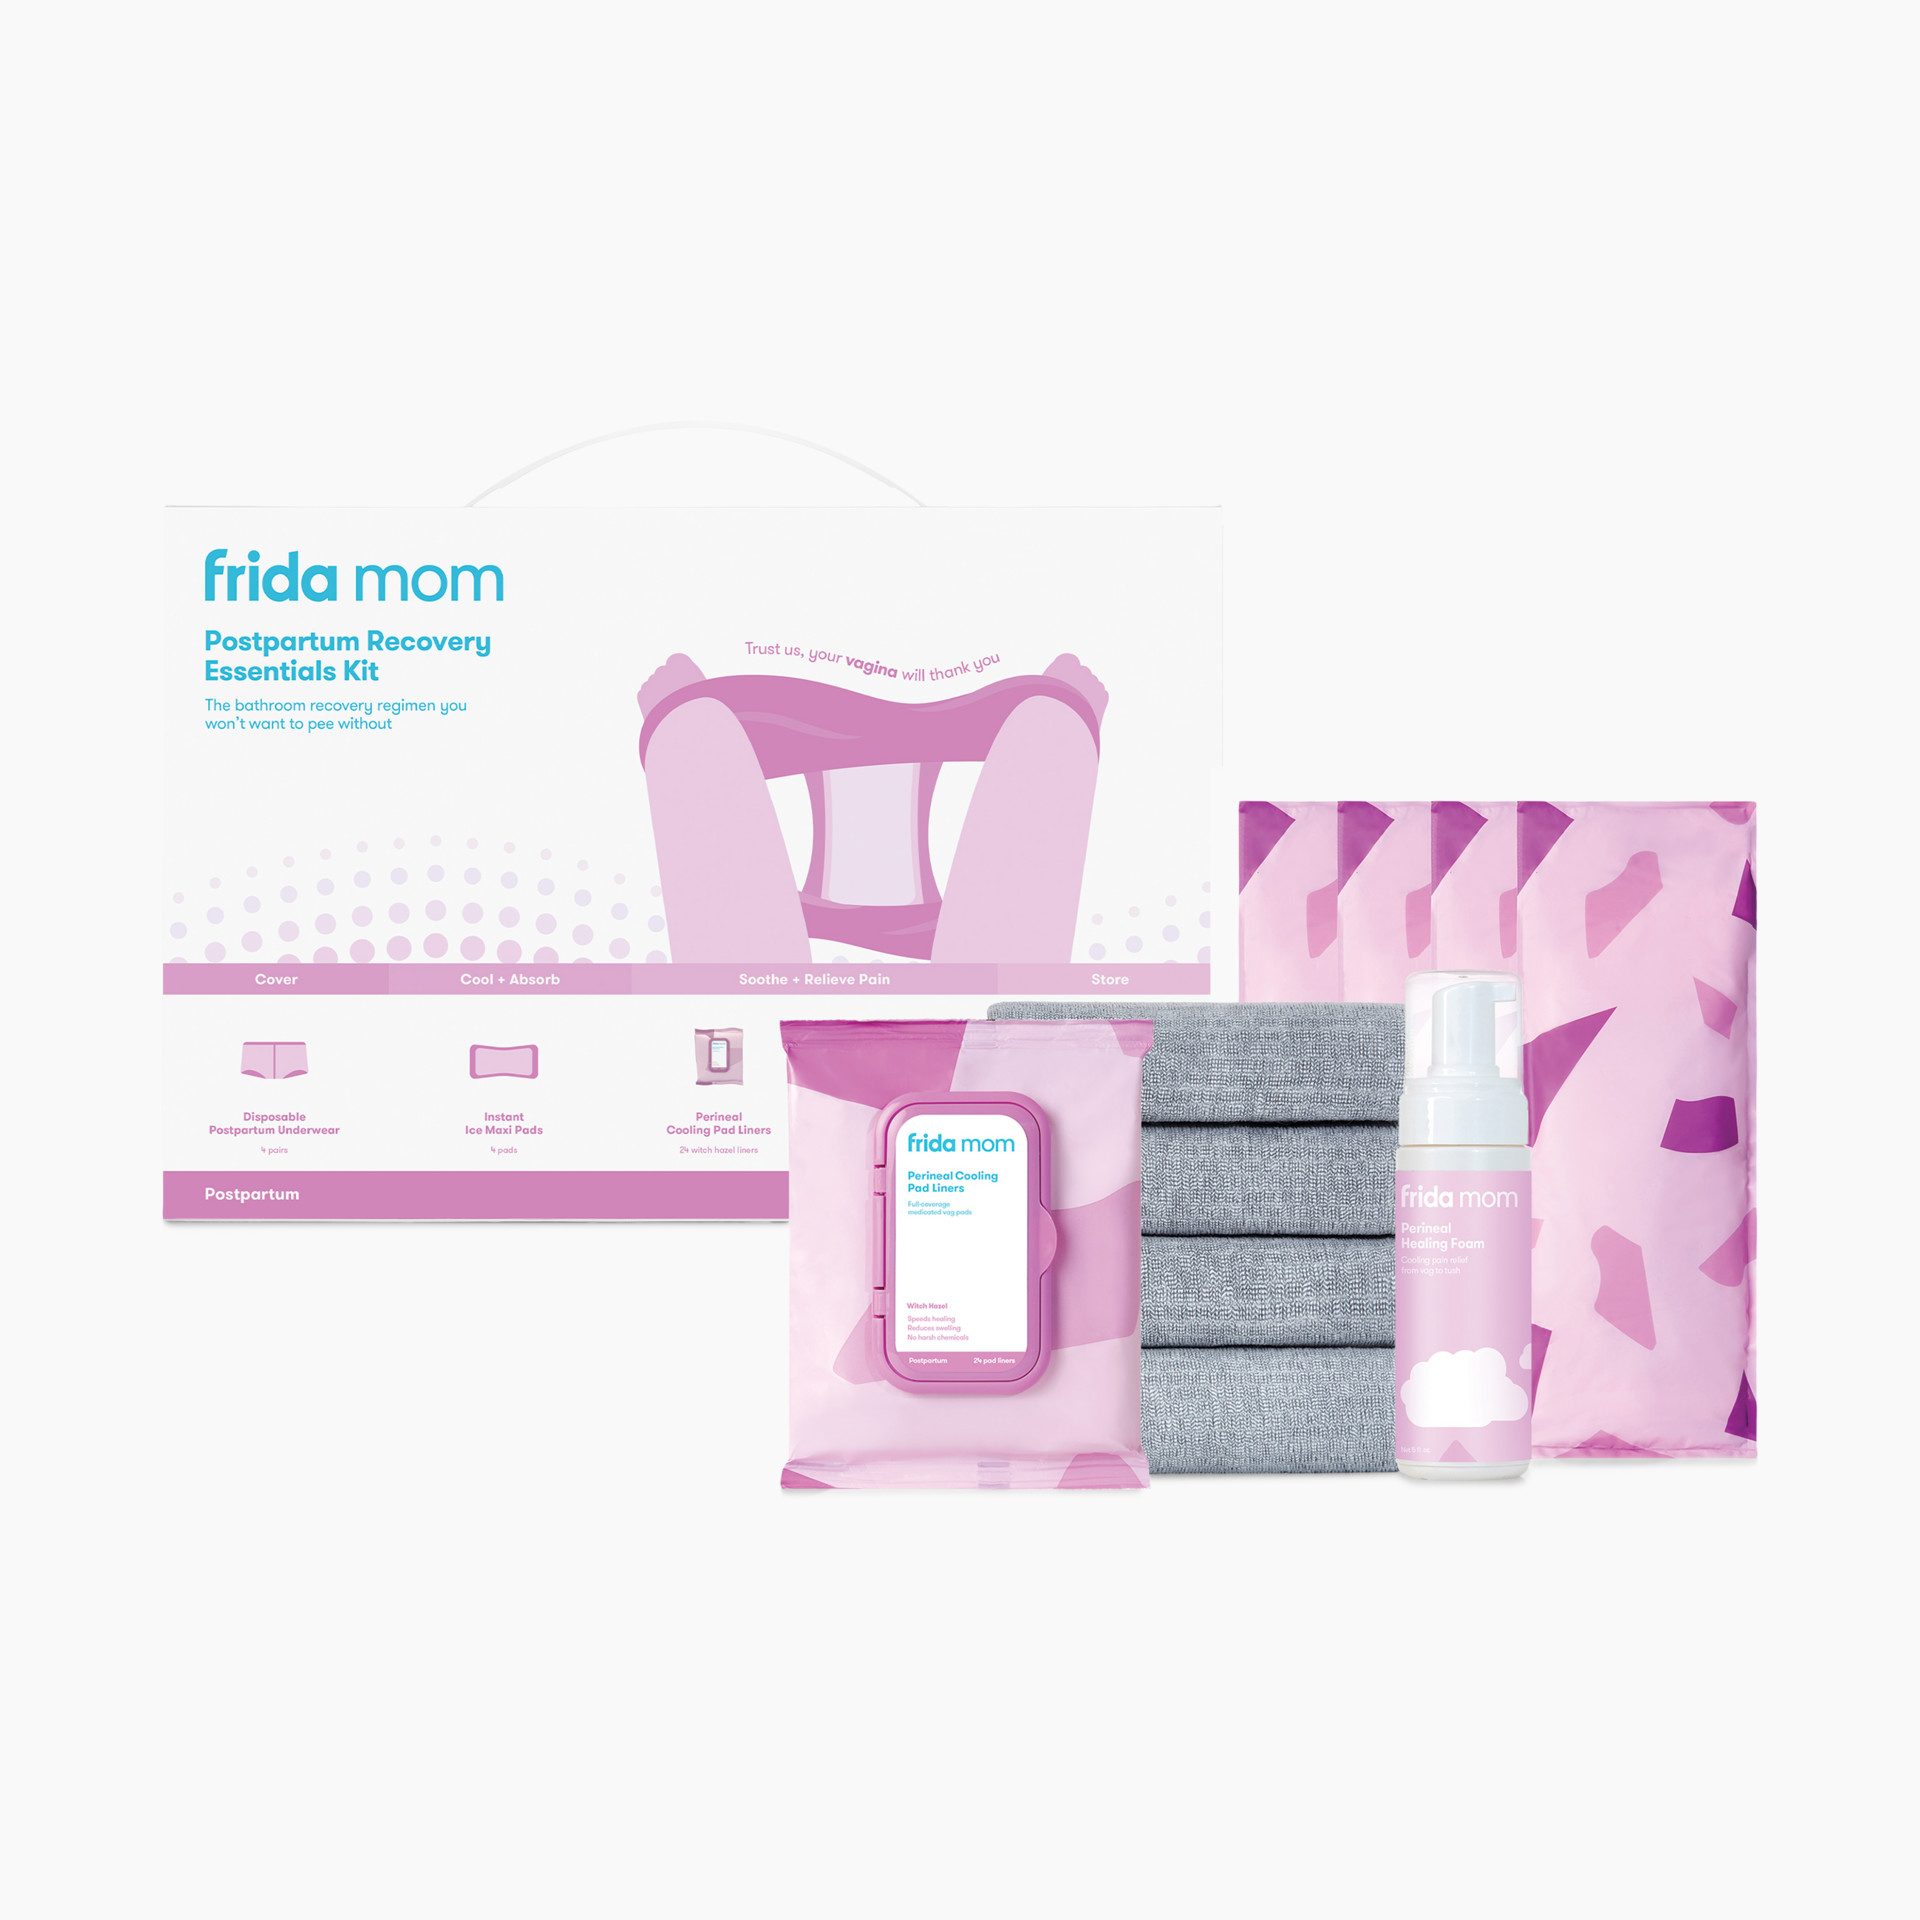 ENQLI Postpartum Kit for Women After Birth - Includes All Postpartum  Essentials with Breastfeeding Essentials Kit | Postpartum Recovery  Essentials Kit